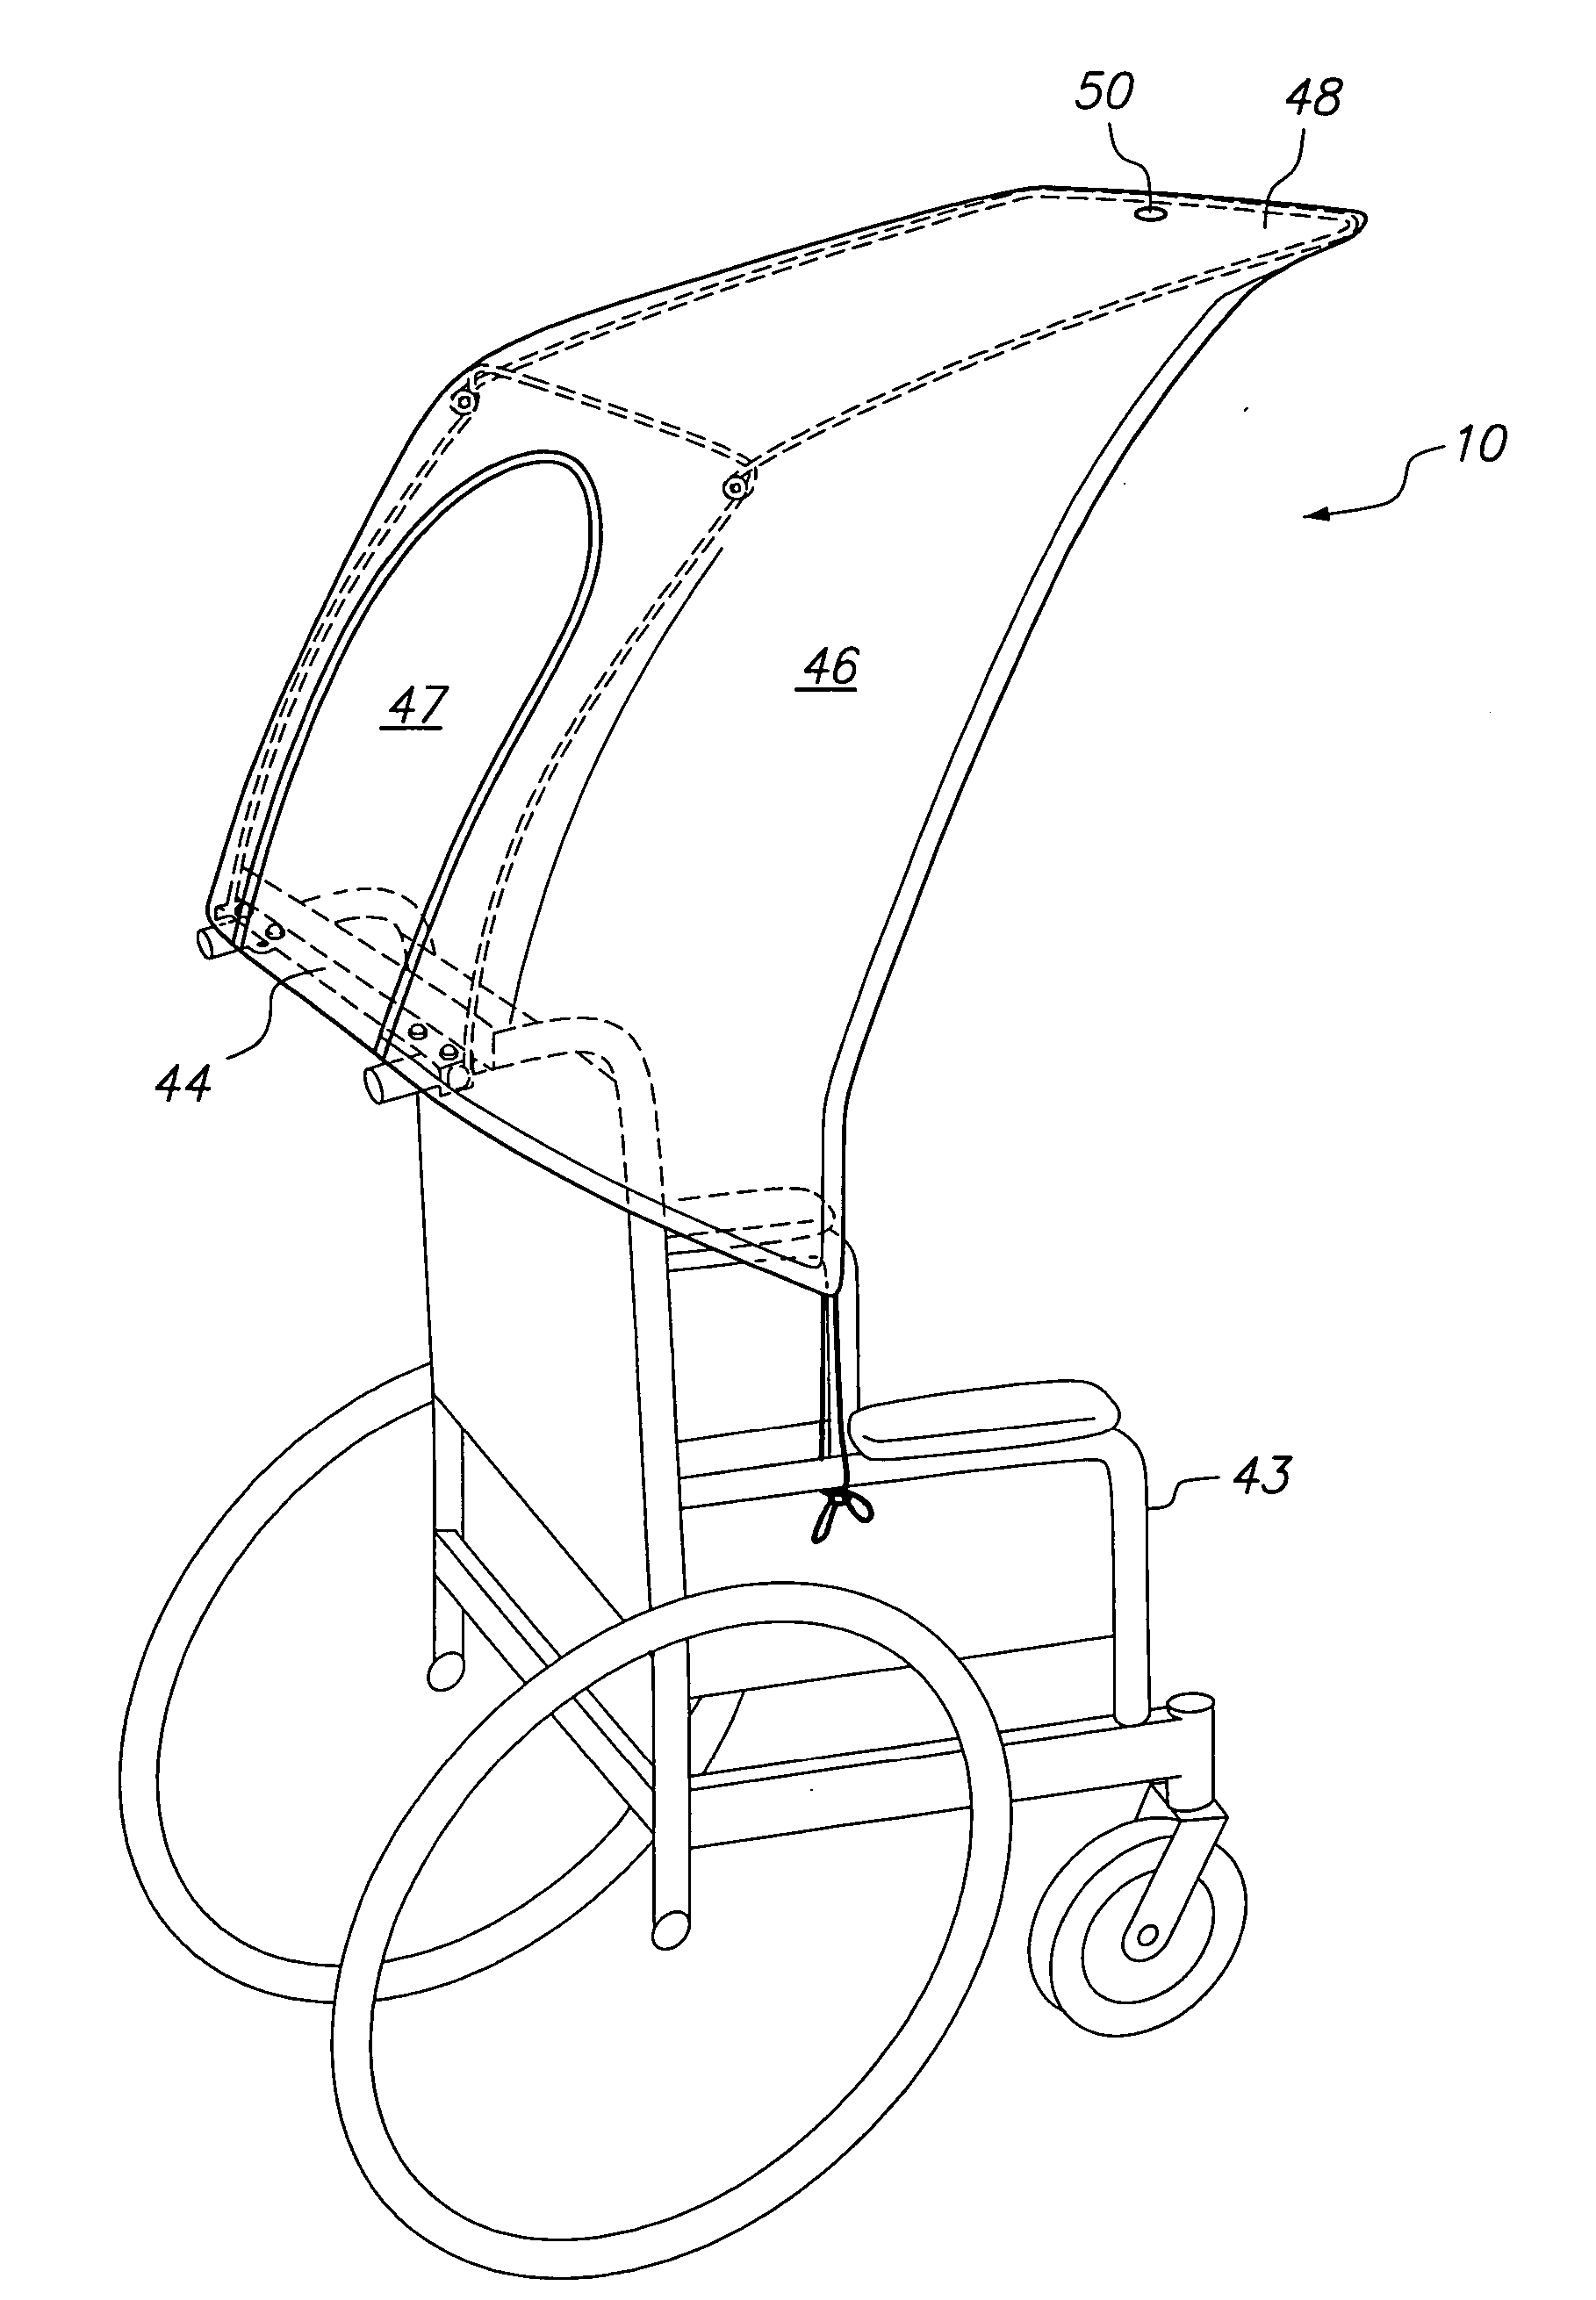 Foldable cover for the overhead protection of an occupant of a wheelchair or other wheeled vehicle